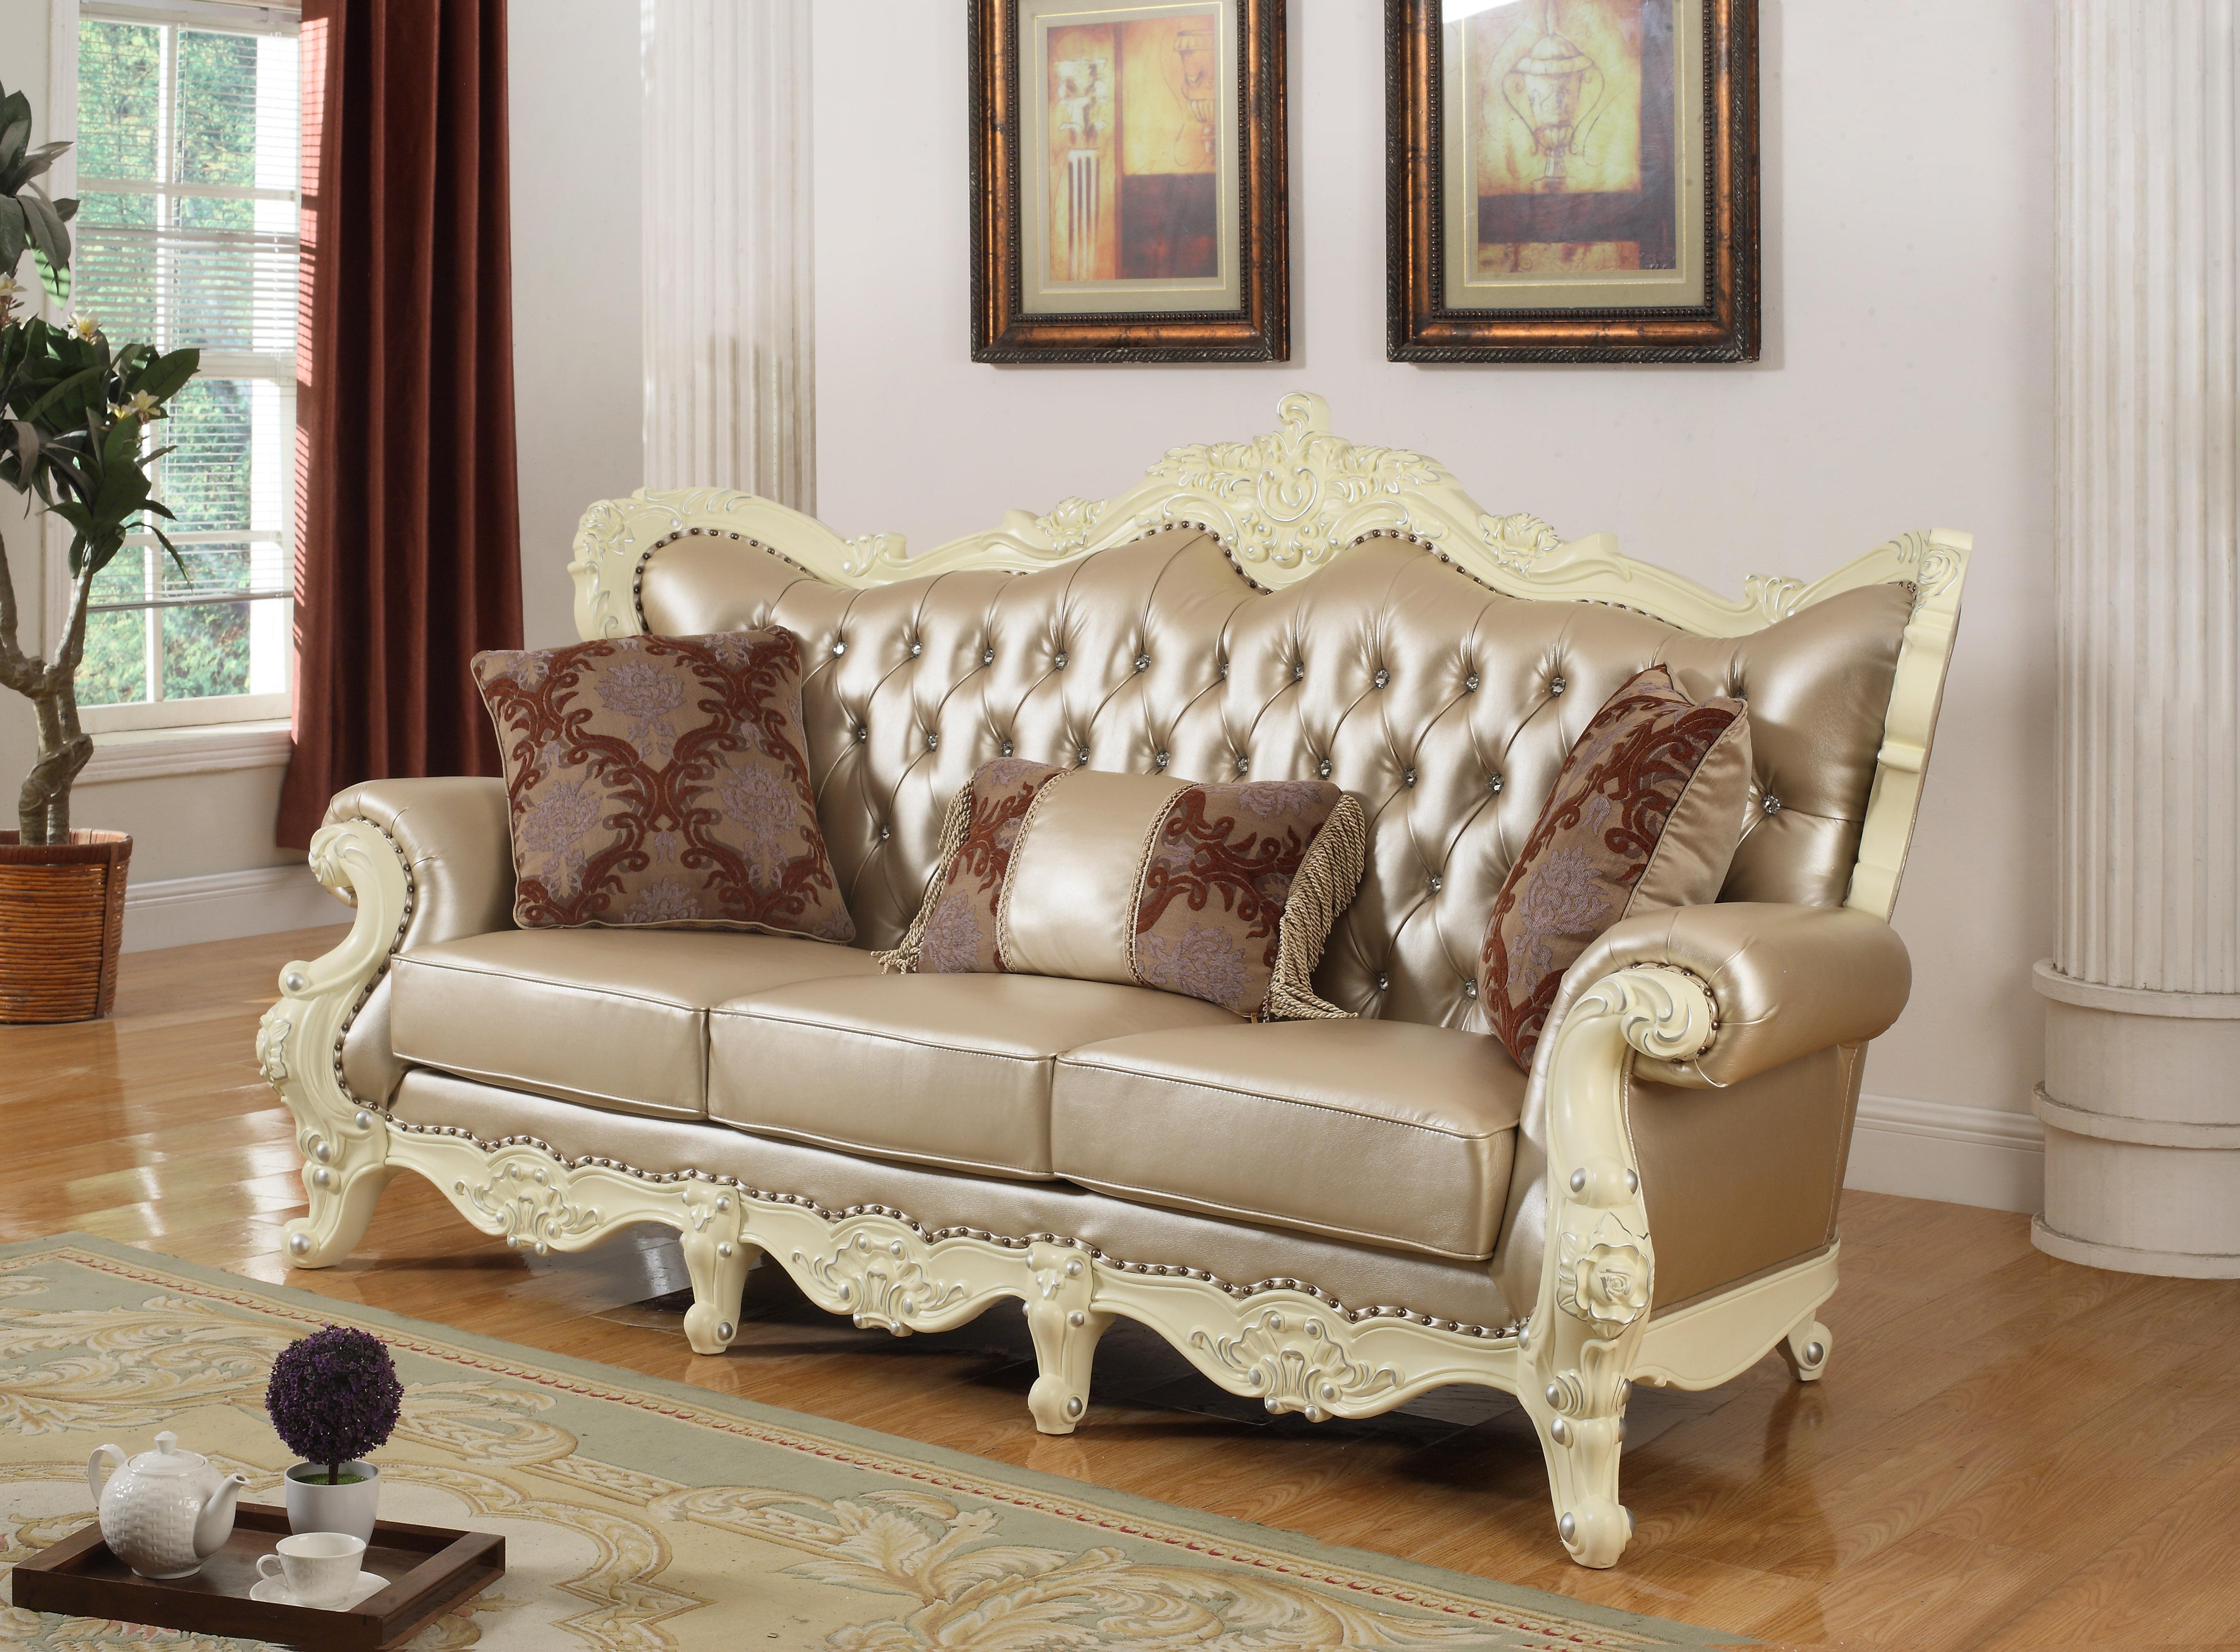 

    
Meridian 674 Madrid Living Room Set 2pcs in Pearl White Hand Carved Traditional
